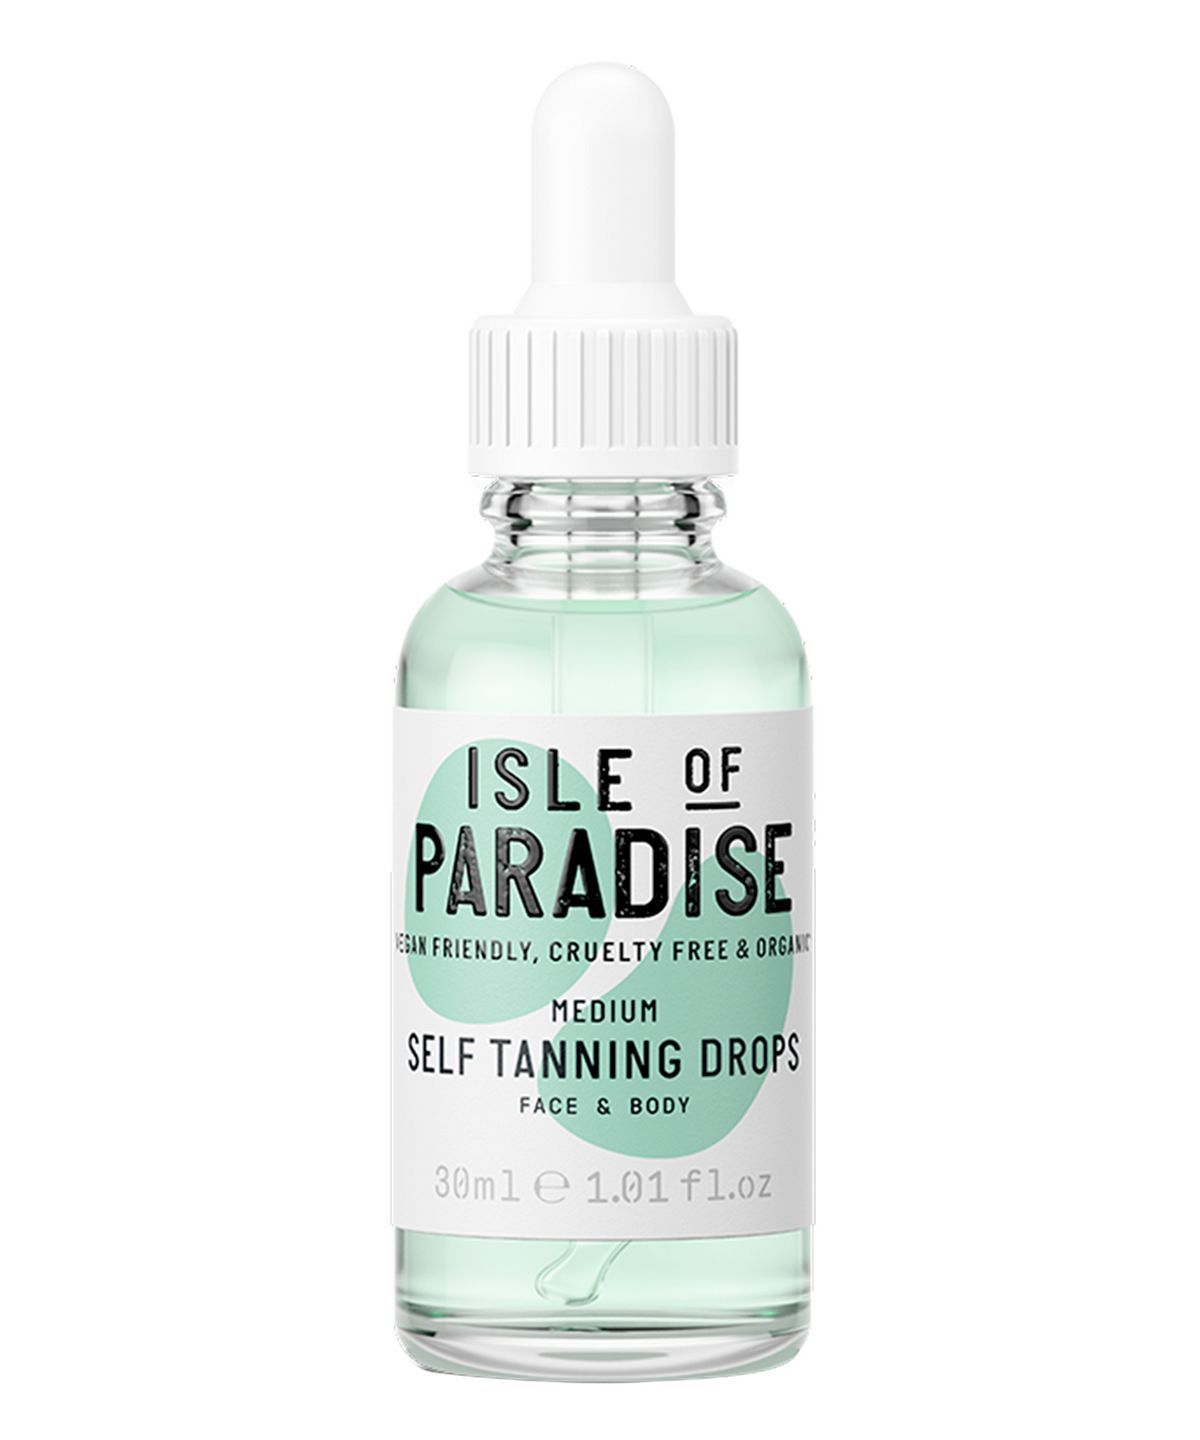 Isle of Paradise Self Tanning Drops in UAE at Shopey